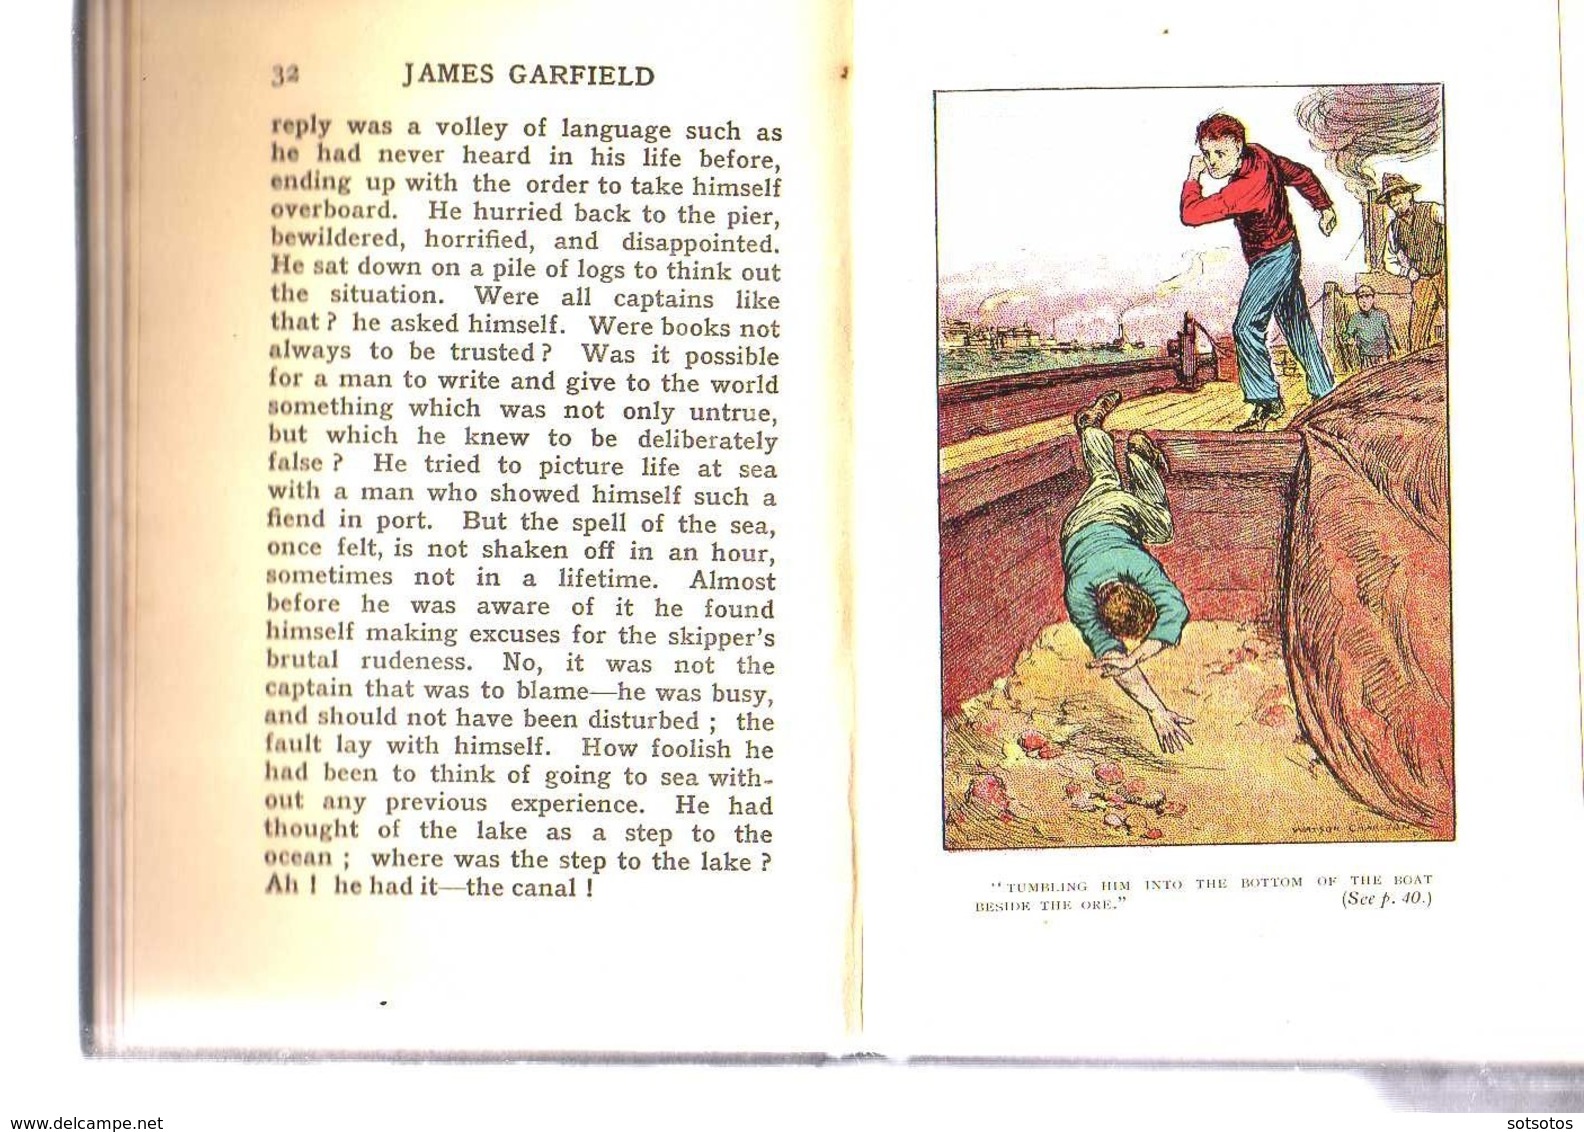 JAMES A. GARFIELD, The Backwoods Boy who became President, by Frank MUNDELL, Ed. ANDREW MELROSE, LONDON 1907